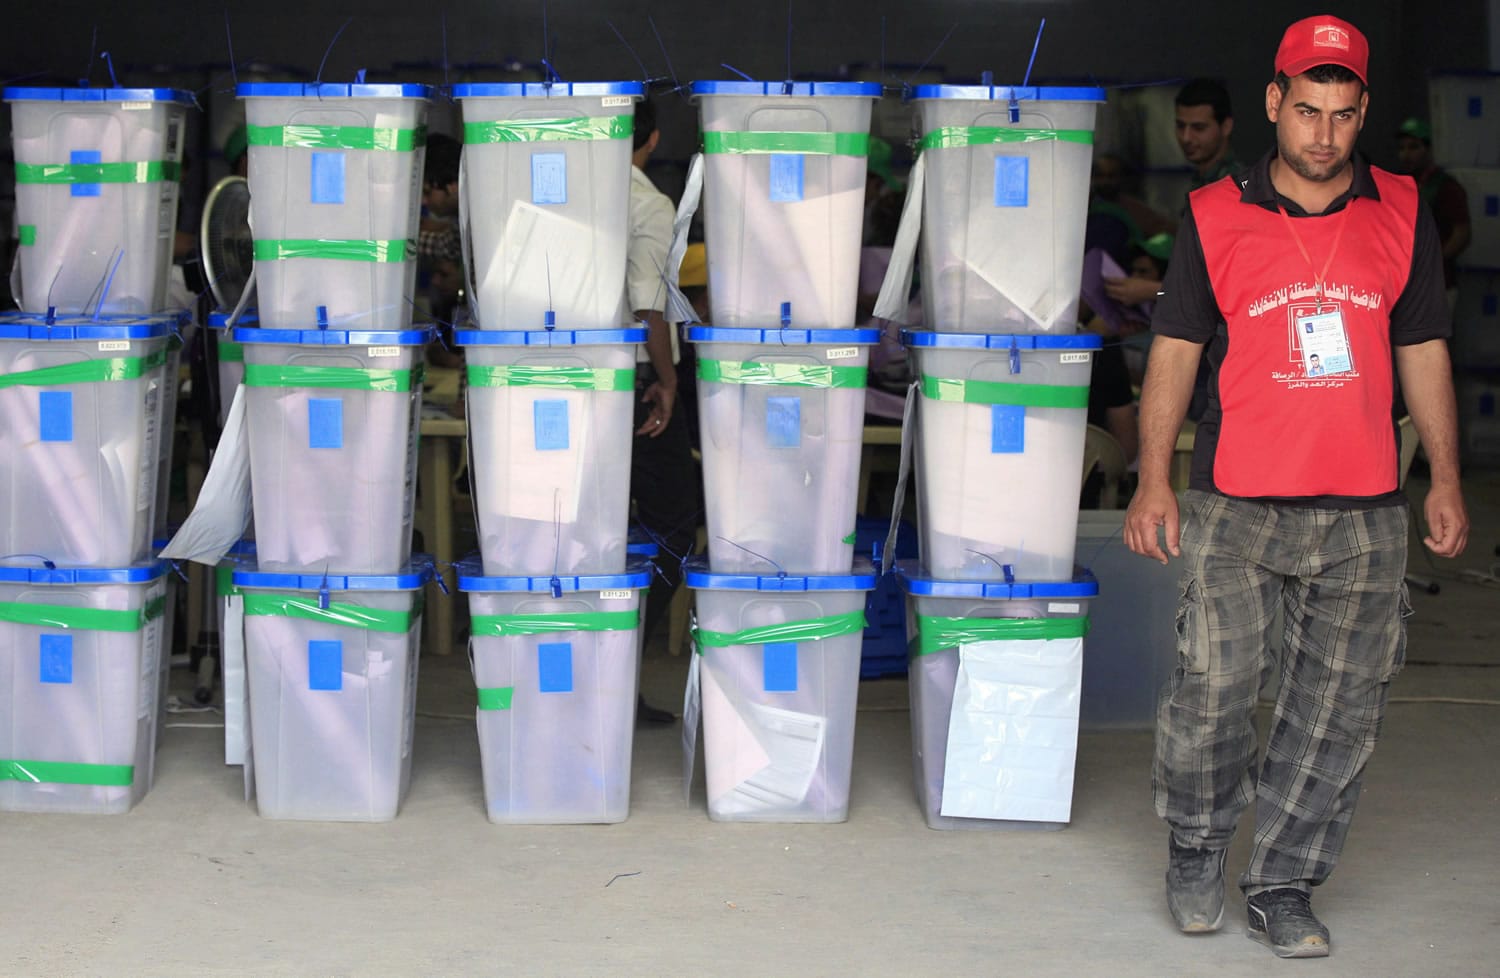 An electoral worker walks past ballot boxes at a counting center after the early voting for security forces in the country's provincial elections in Baghdad, Iraq, on Monday.